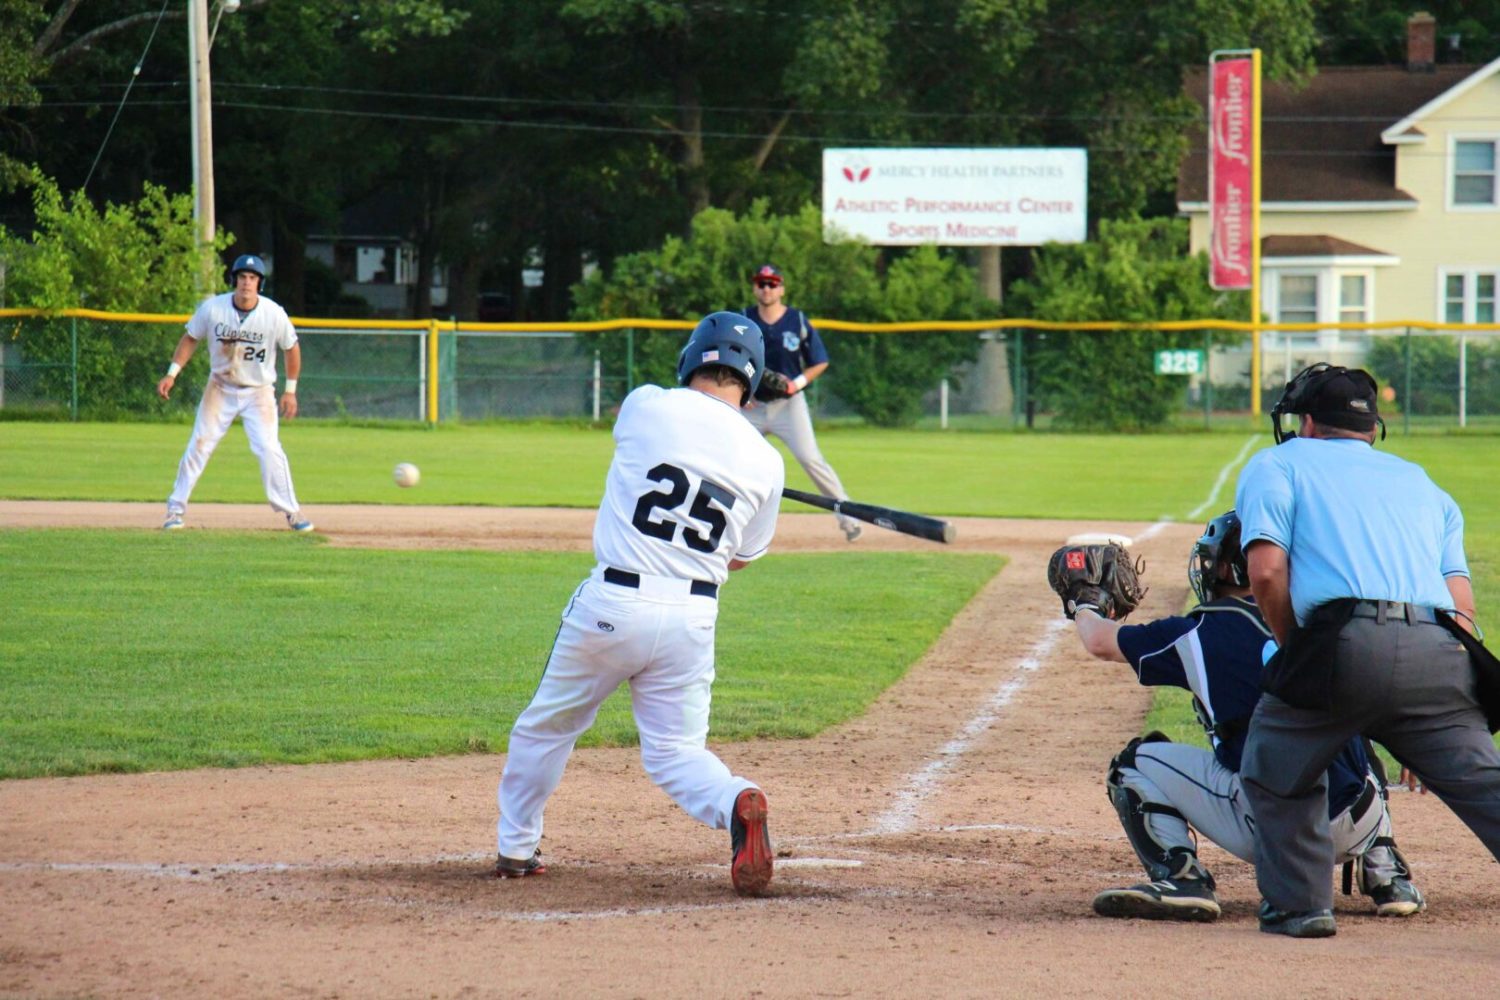 Muskegon Clippers commit six costly errors and lose a 7-2 home game to River City